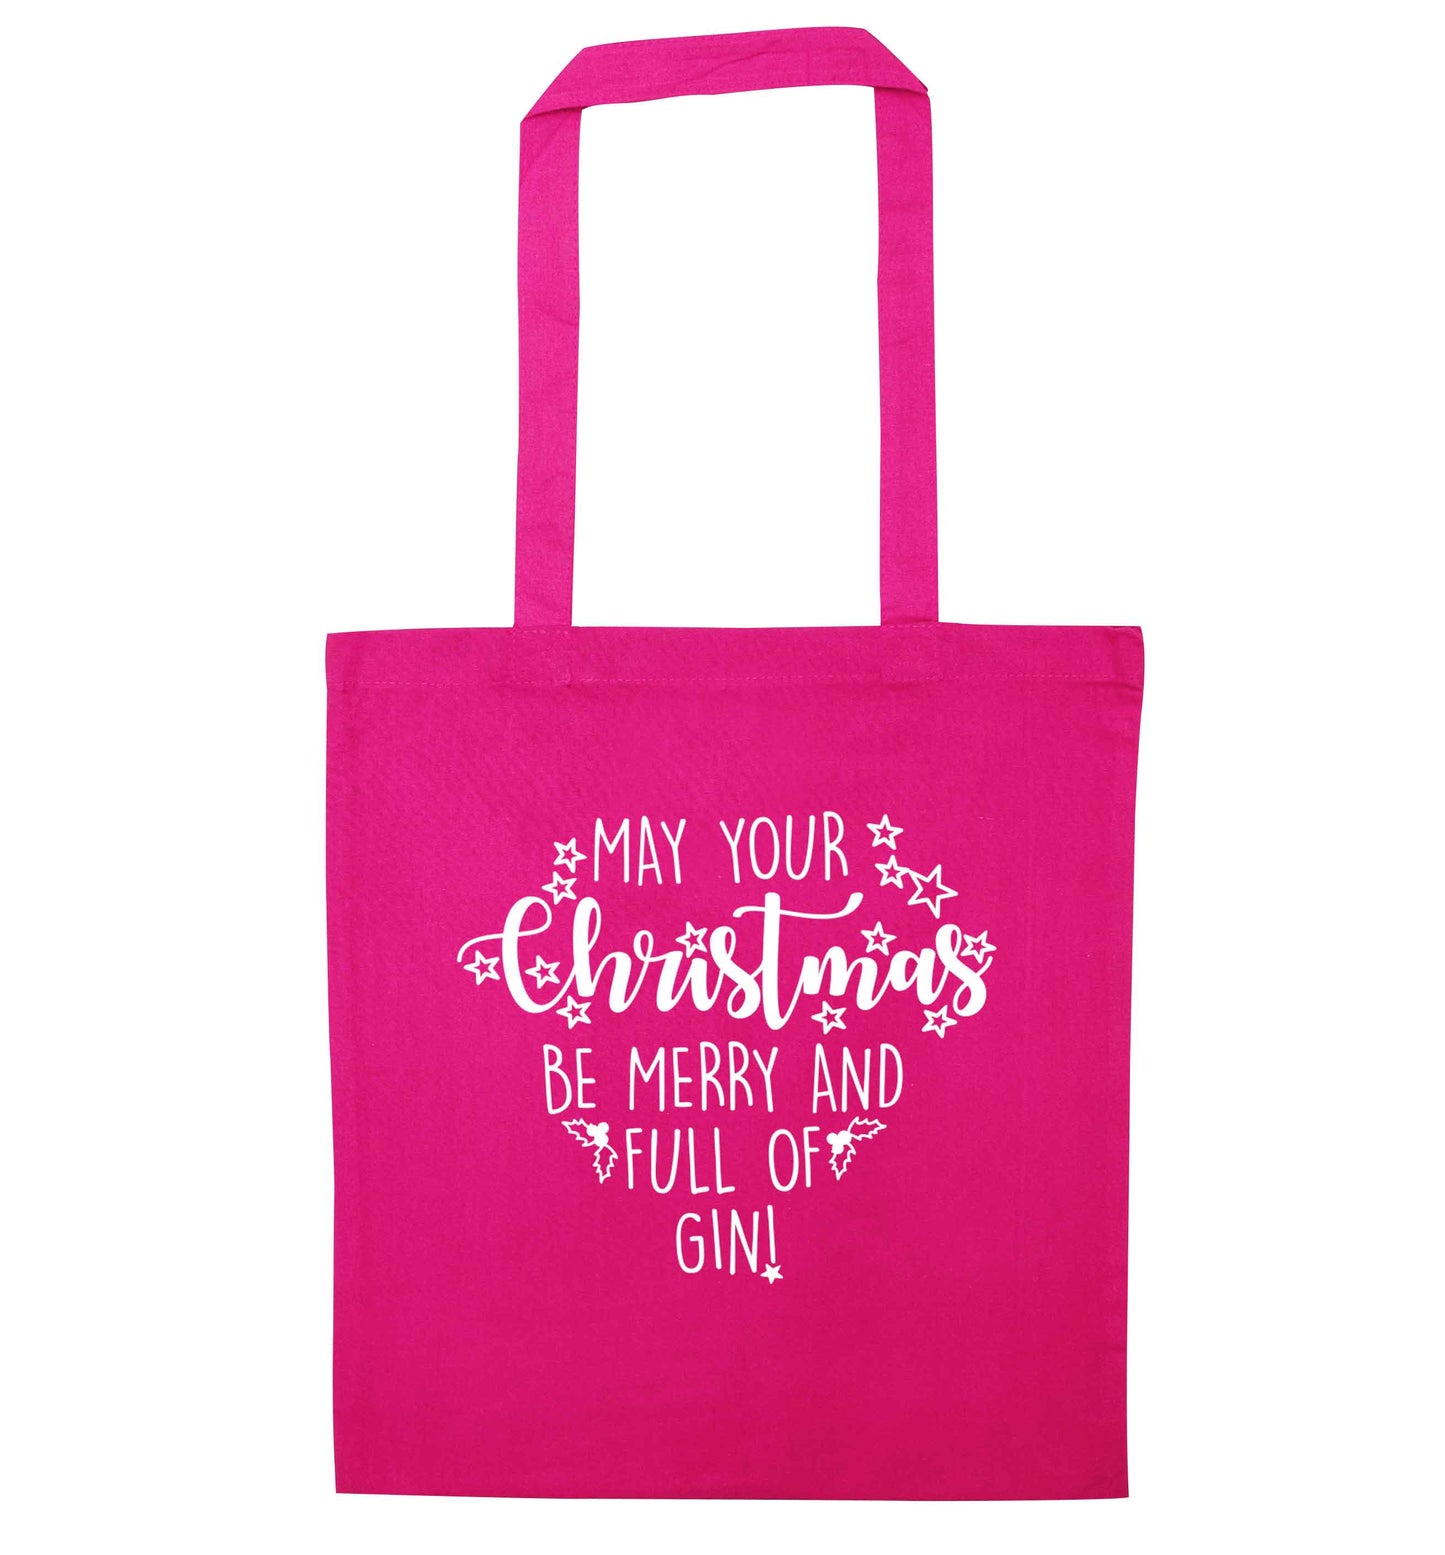 May your Christmas be merry and full of gin pink tote bag